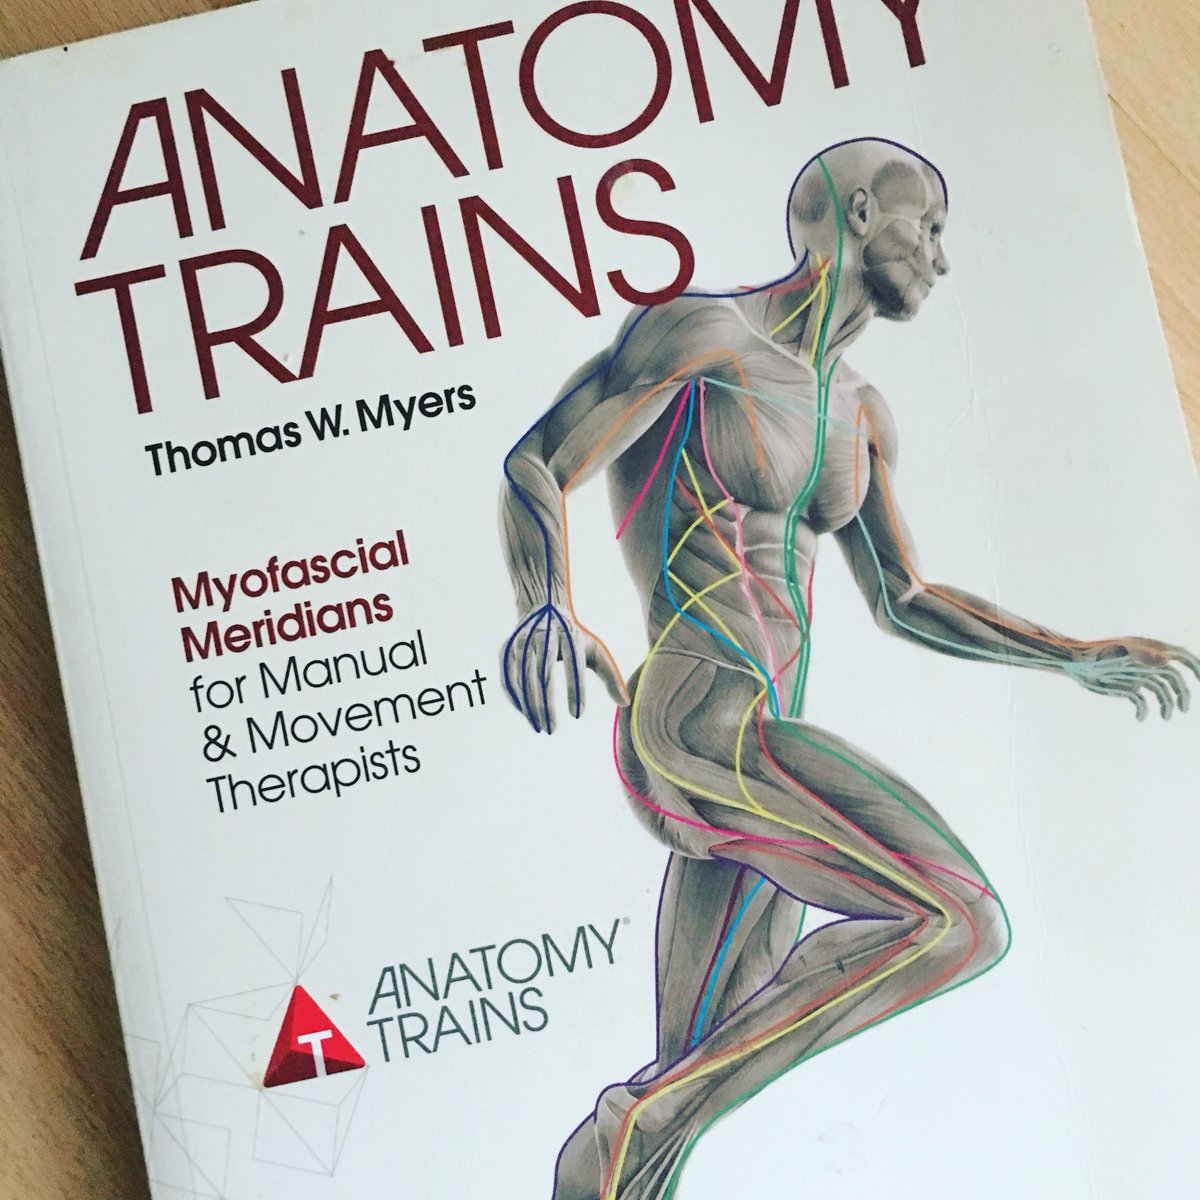 Feeding the brain 🧠 Looking forward to a educating weekend with @AnatomyTrains #fascia #learning #movement #pilates